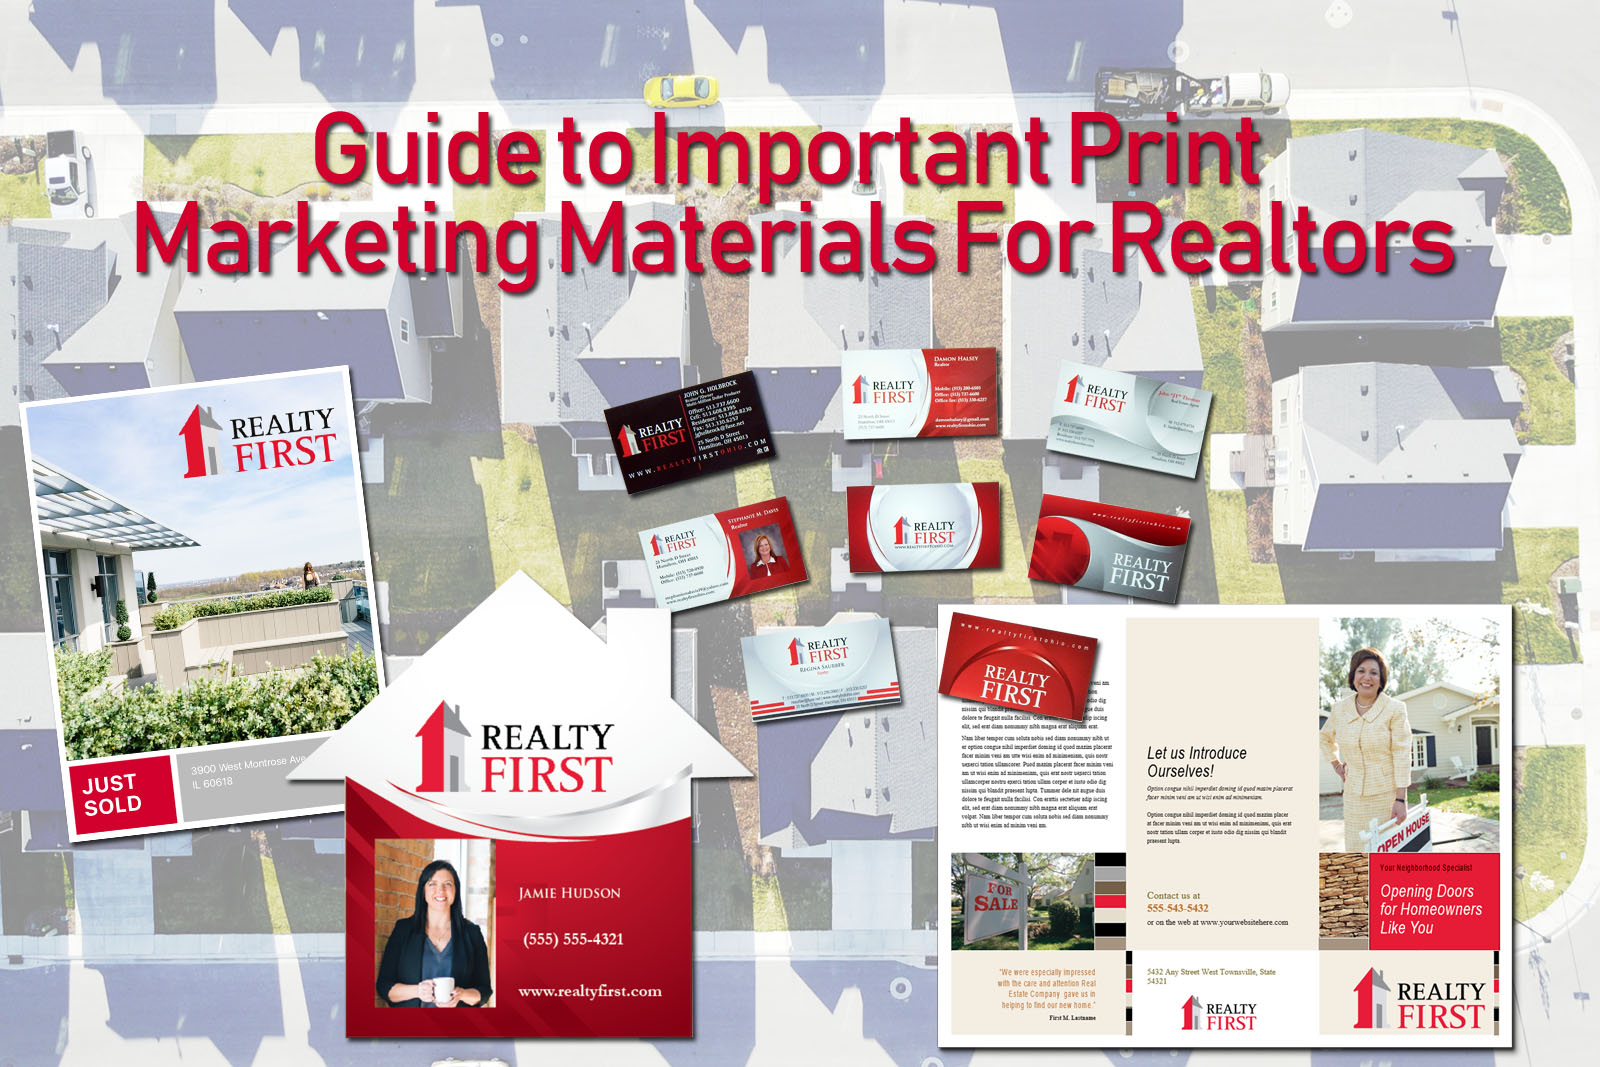 Getting the best out of your Real Estate Marketing - Print Den's Blog